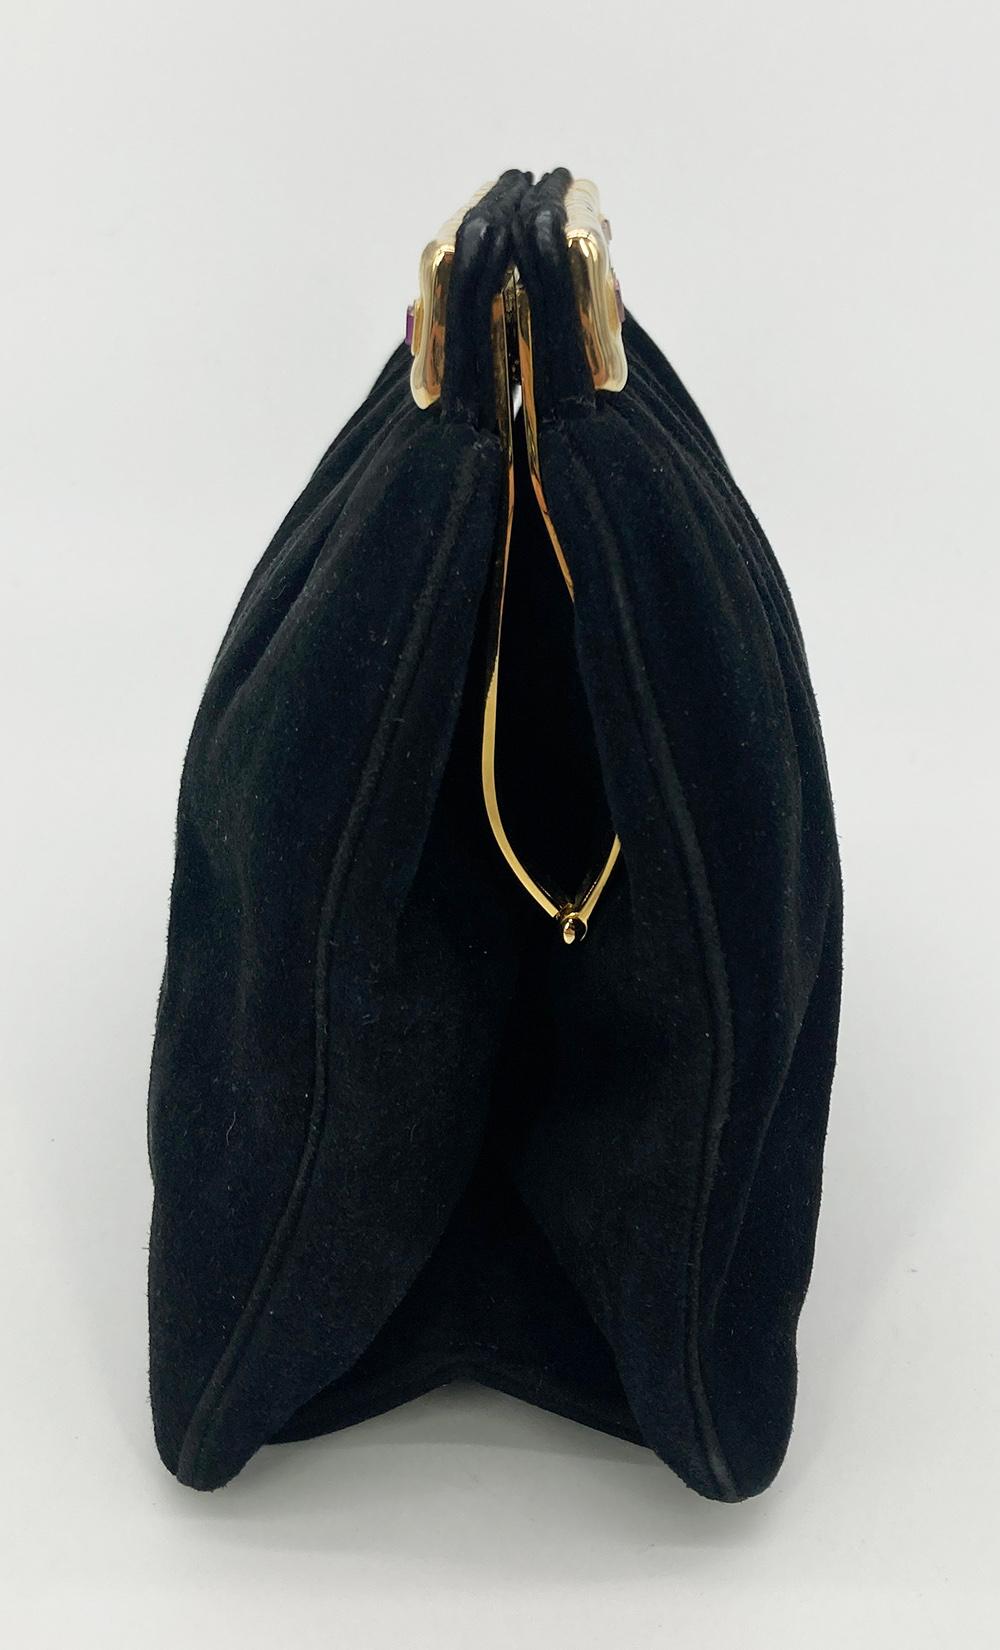 Judith Leiber Black Suede Gemstone Top Clutch in very good condition. black suede trimmed with gold hardware and multi color gemstones along top edge. Top side pull latch closure opens to a black nylon interior with one slit and one zip side pockets